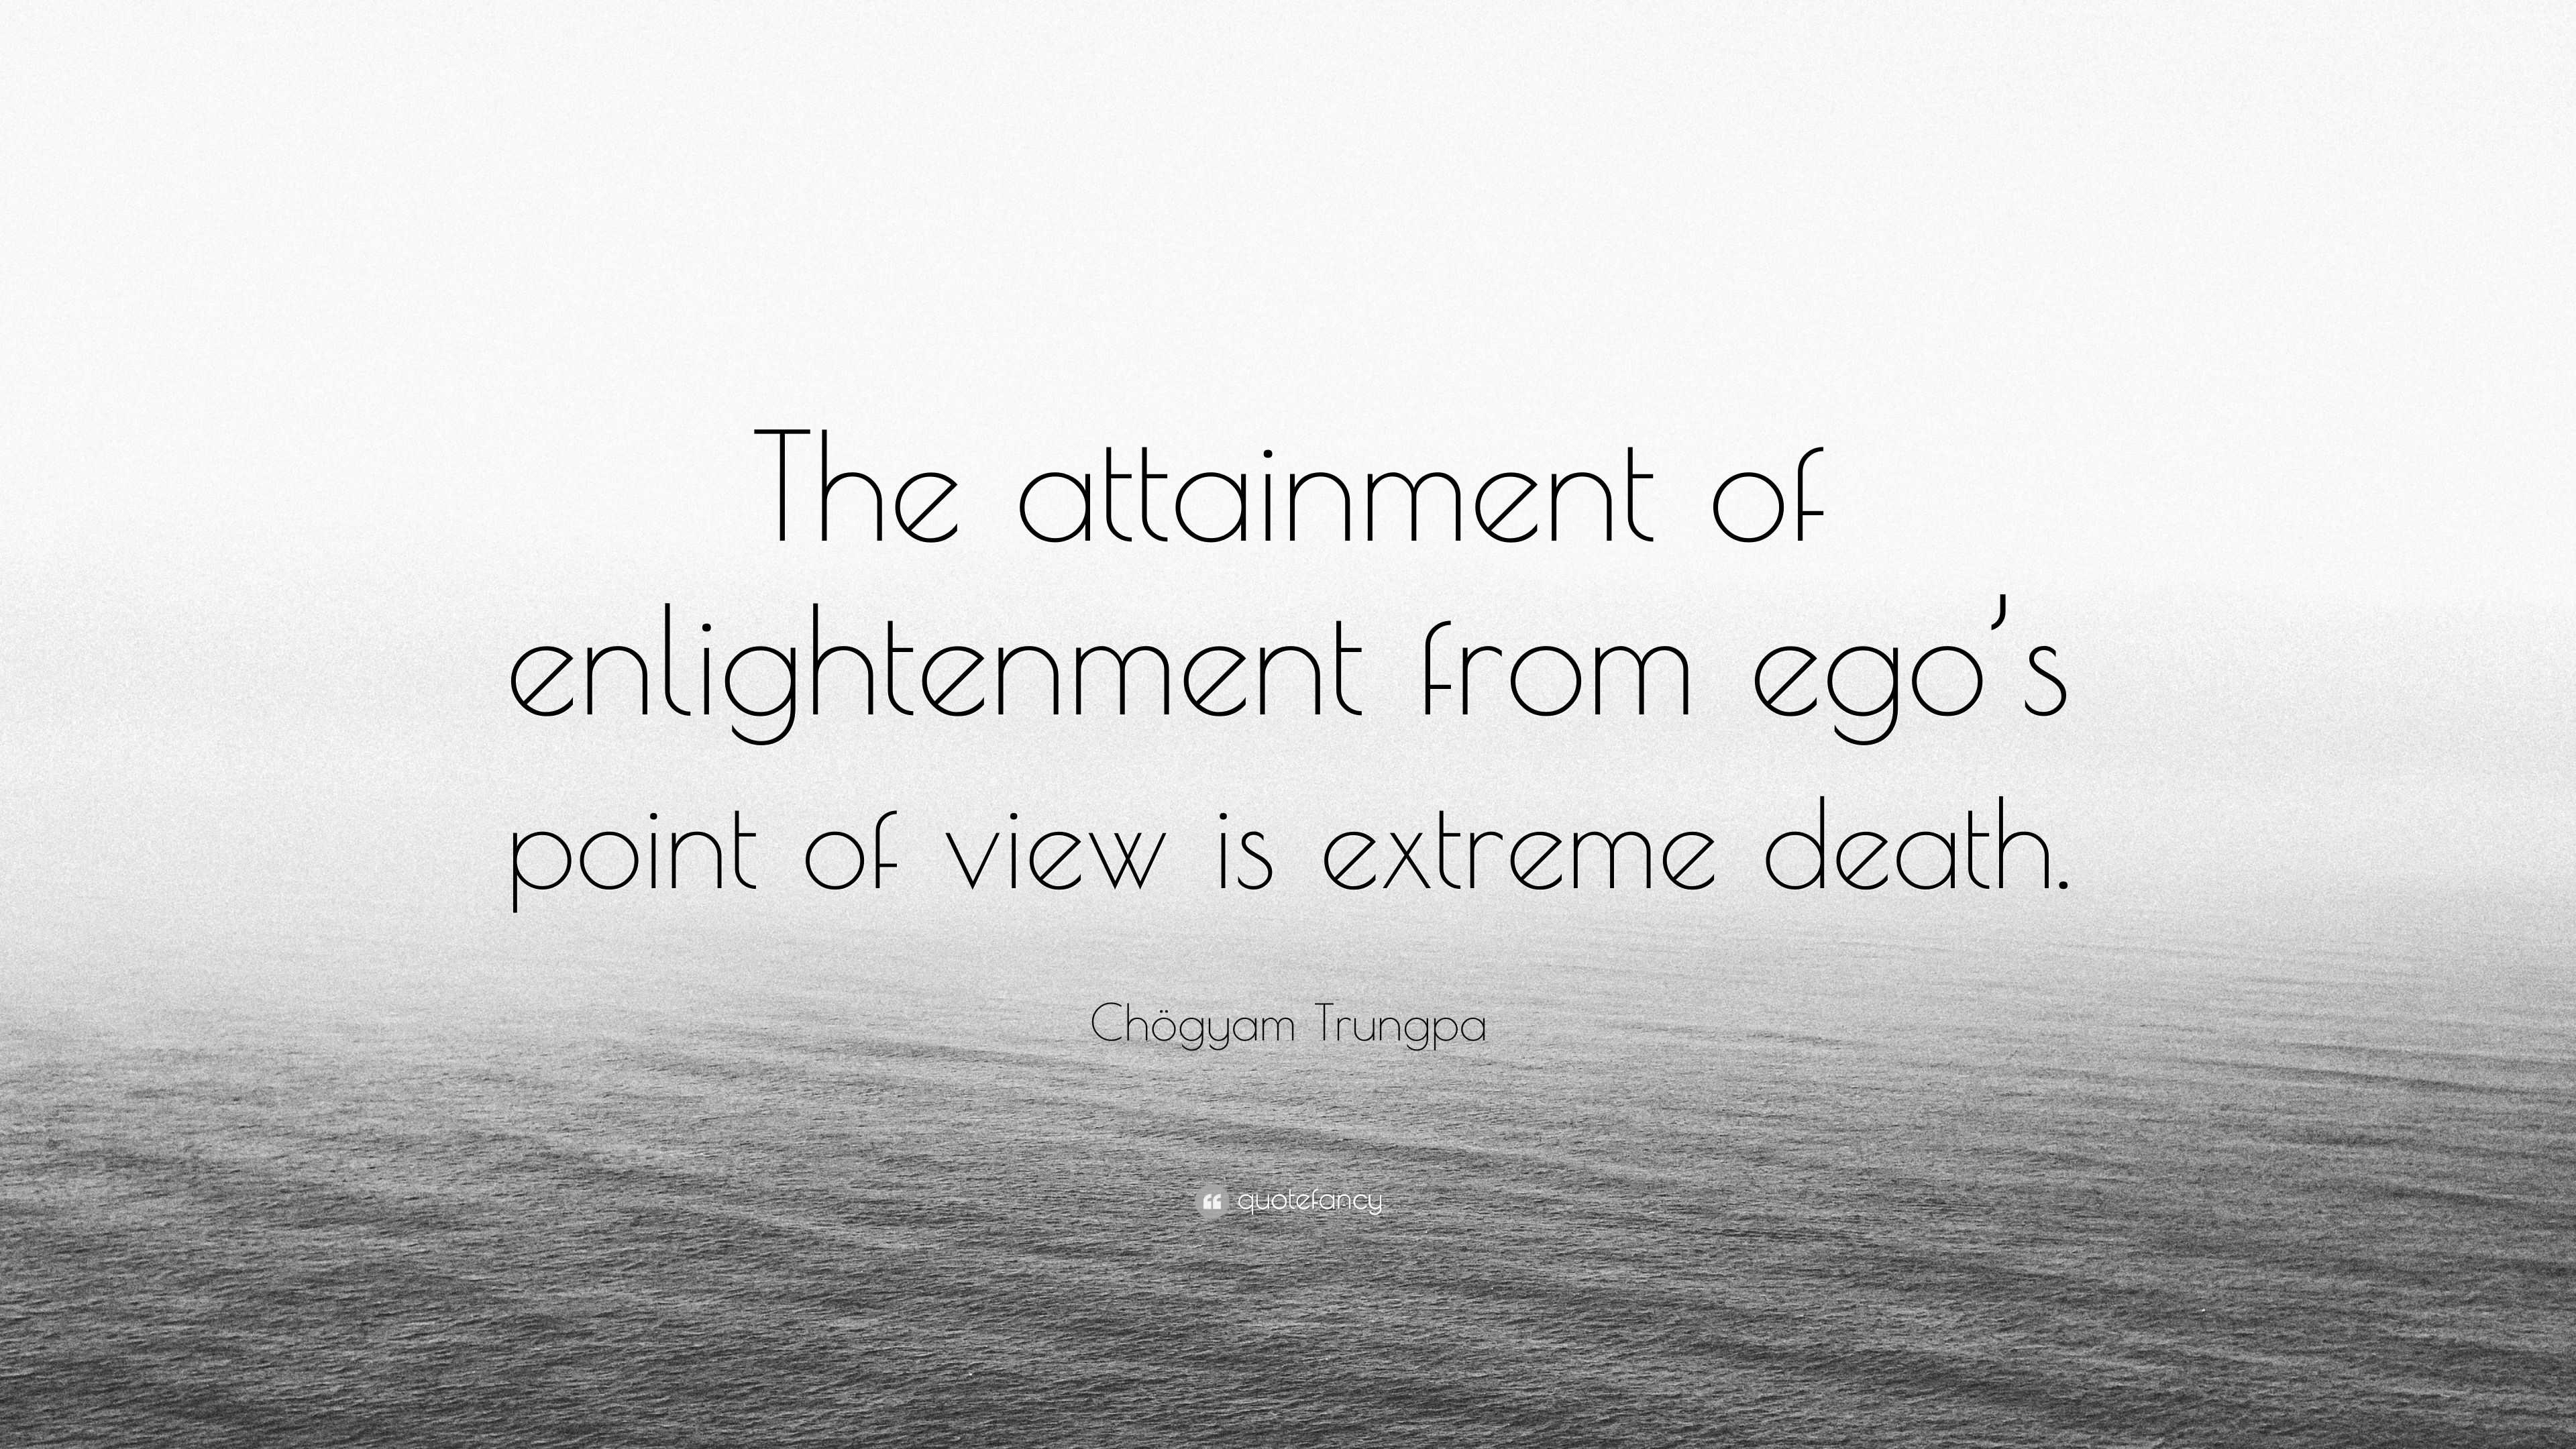 Chögyam Trungpa Quote: “The attainment of enlightenment from ego's